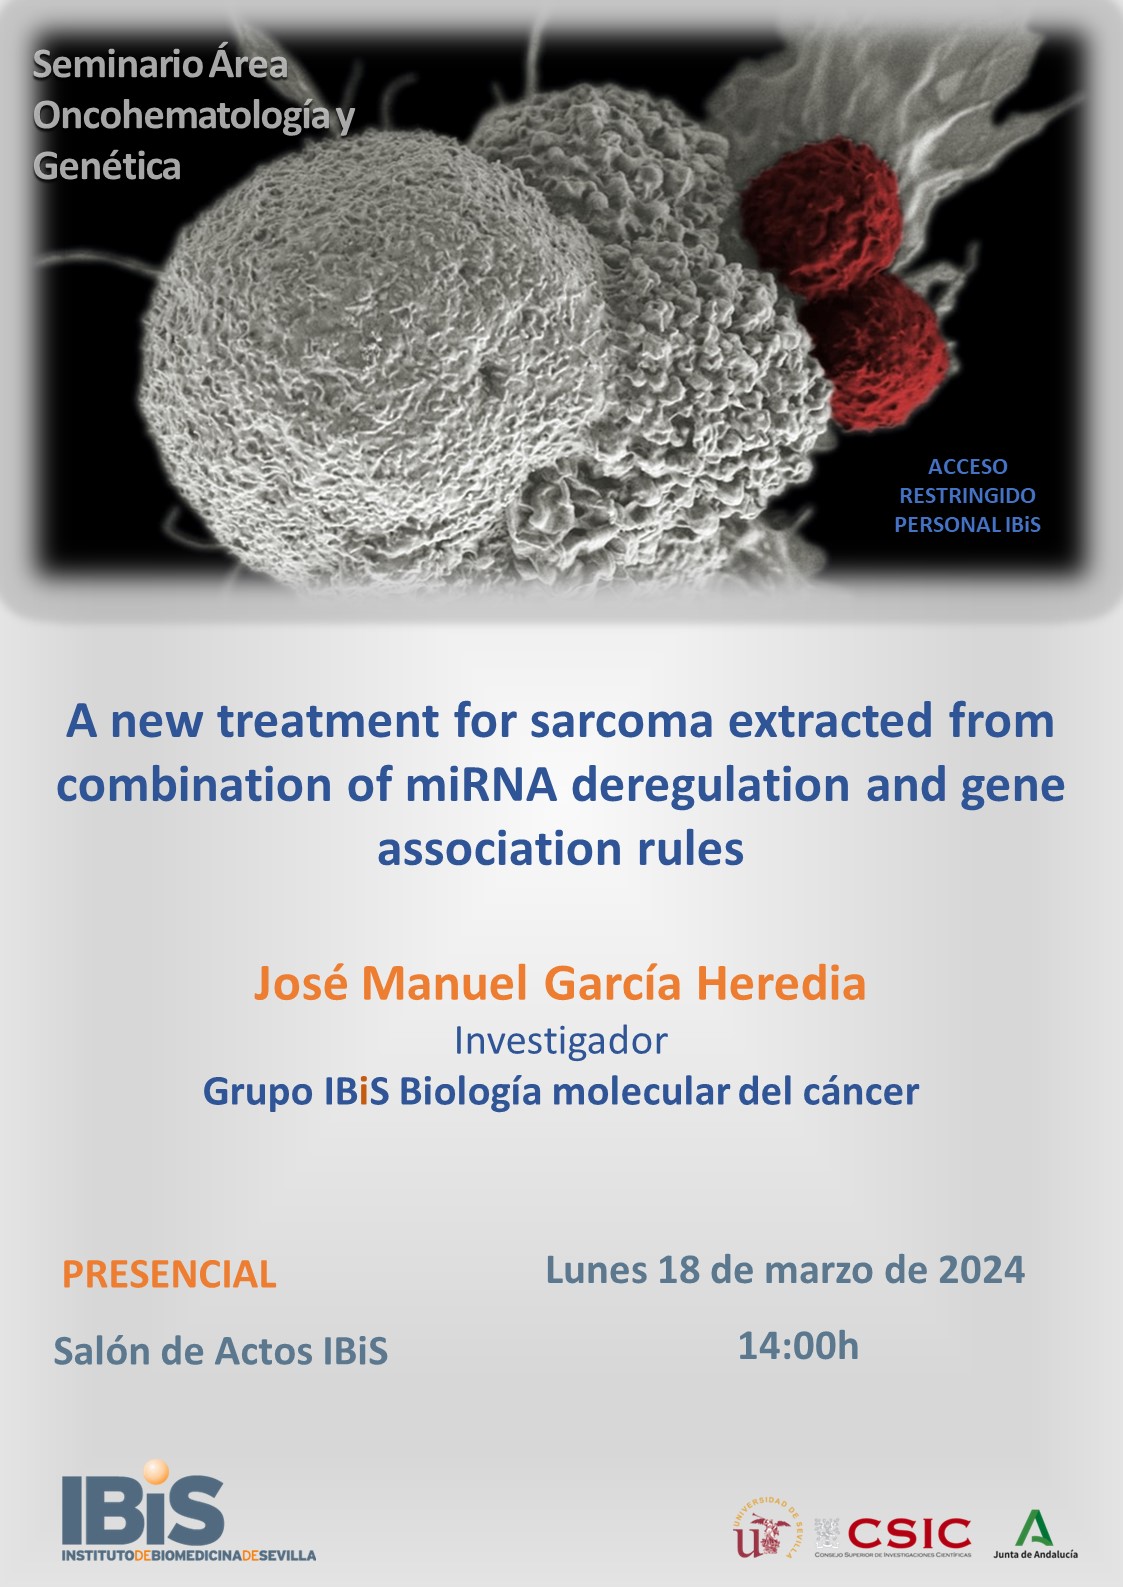 Poster: A new treatment for sarcoma extracted from combination of miRNA deregulation and gene association rules